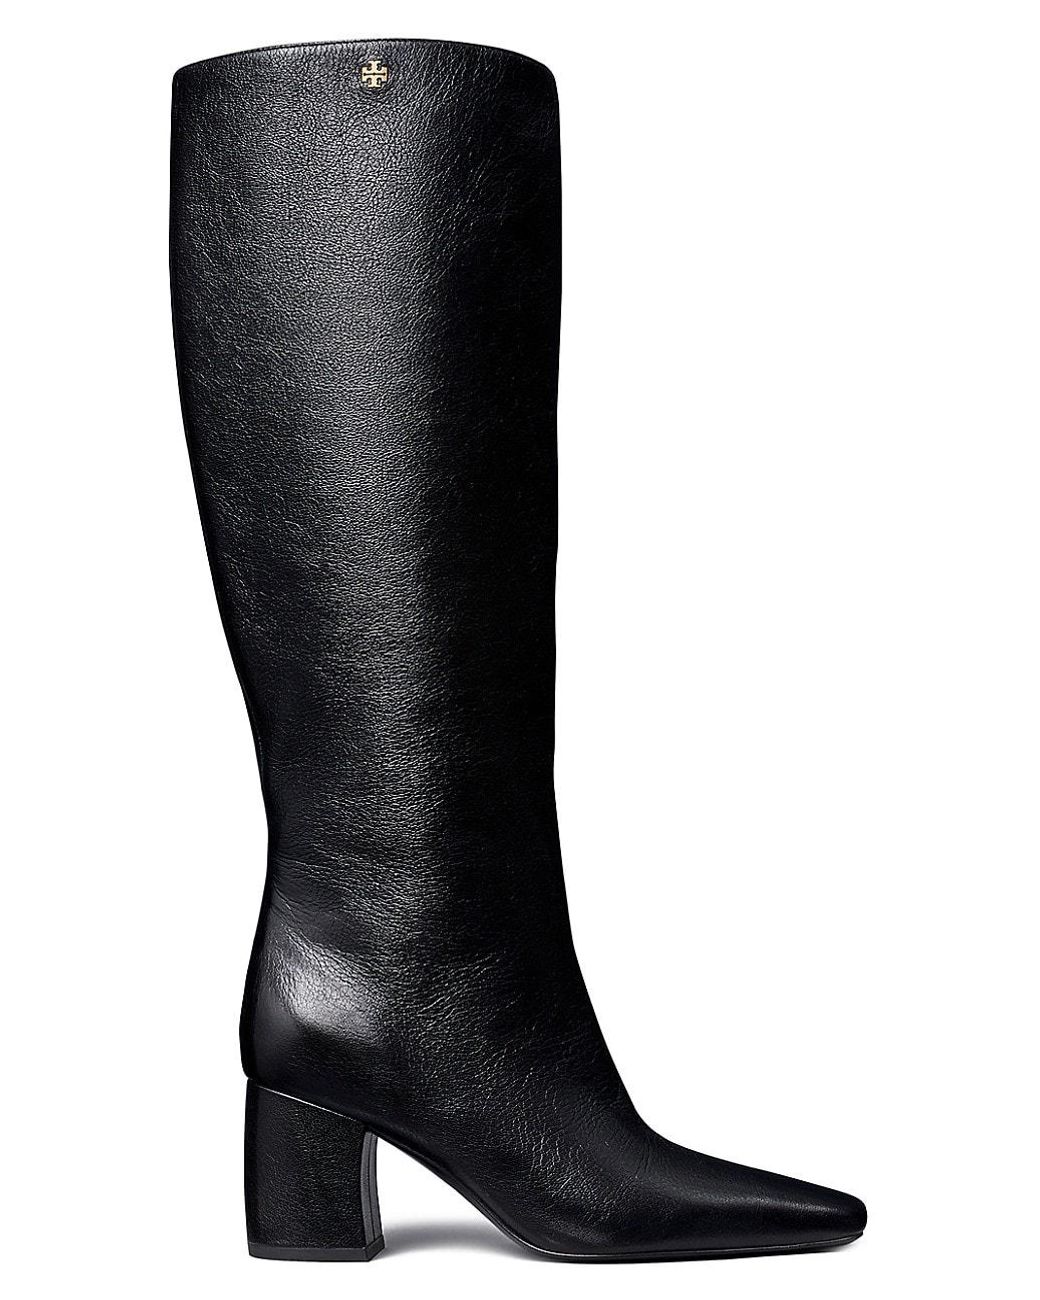 Tory Burch Banana 55mm Leather Knee-high Boots in Black | Lyst